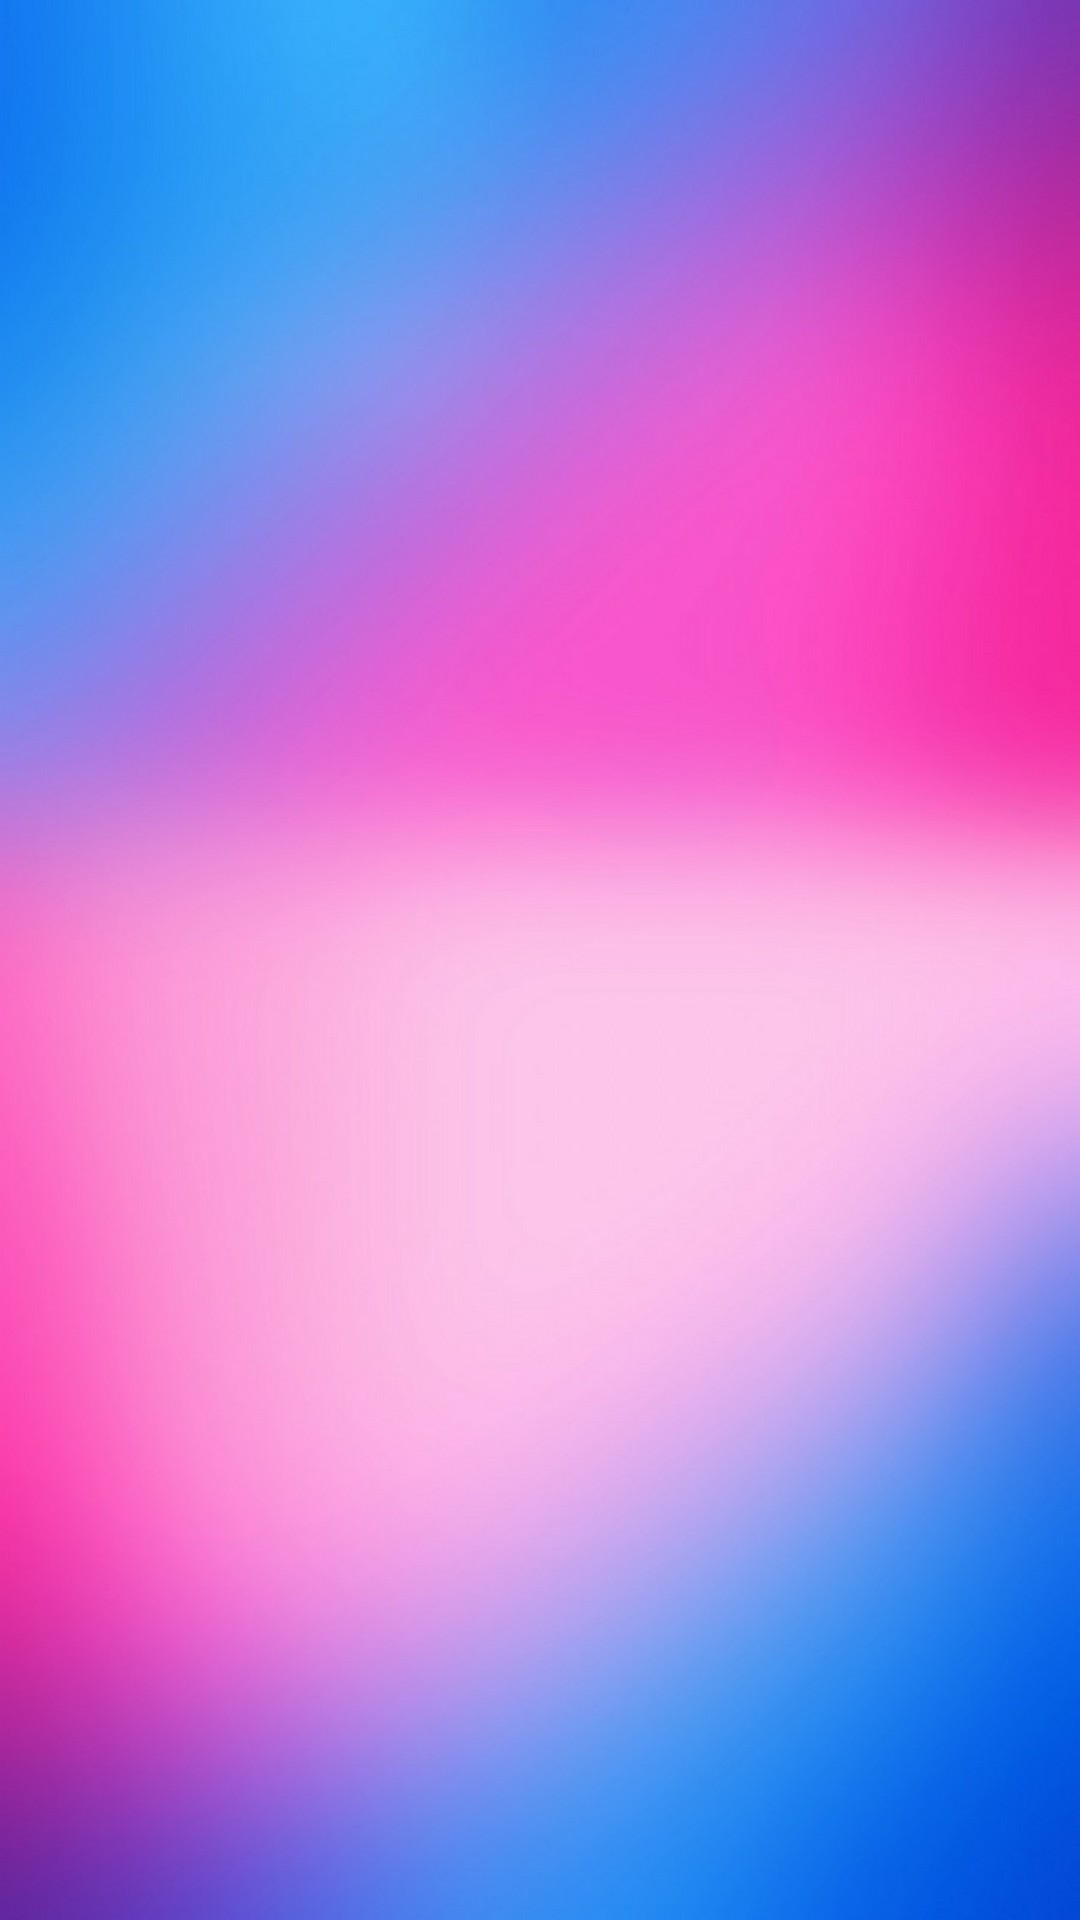 Desktop Wallpaper Gradient with high-resolution 1080x1920 pixel. You can use this wallpaper for your Windows and Mac OS computers as well as your Android and iPhone smartphones